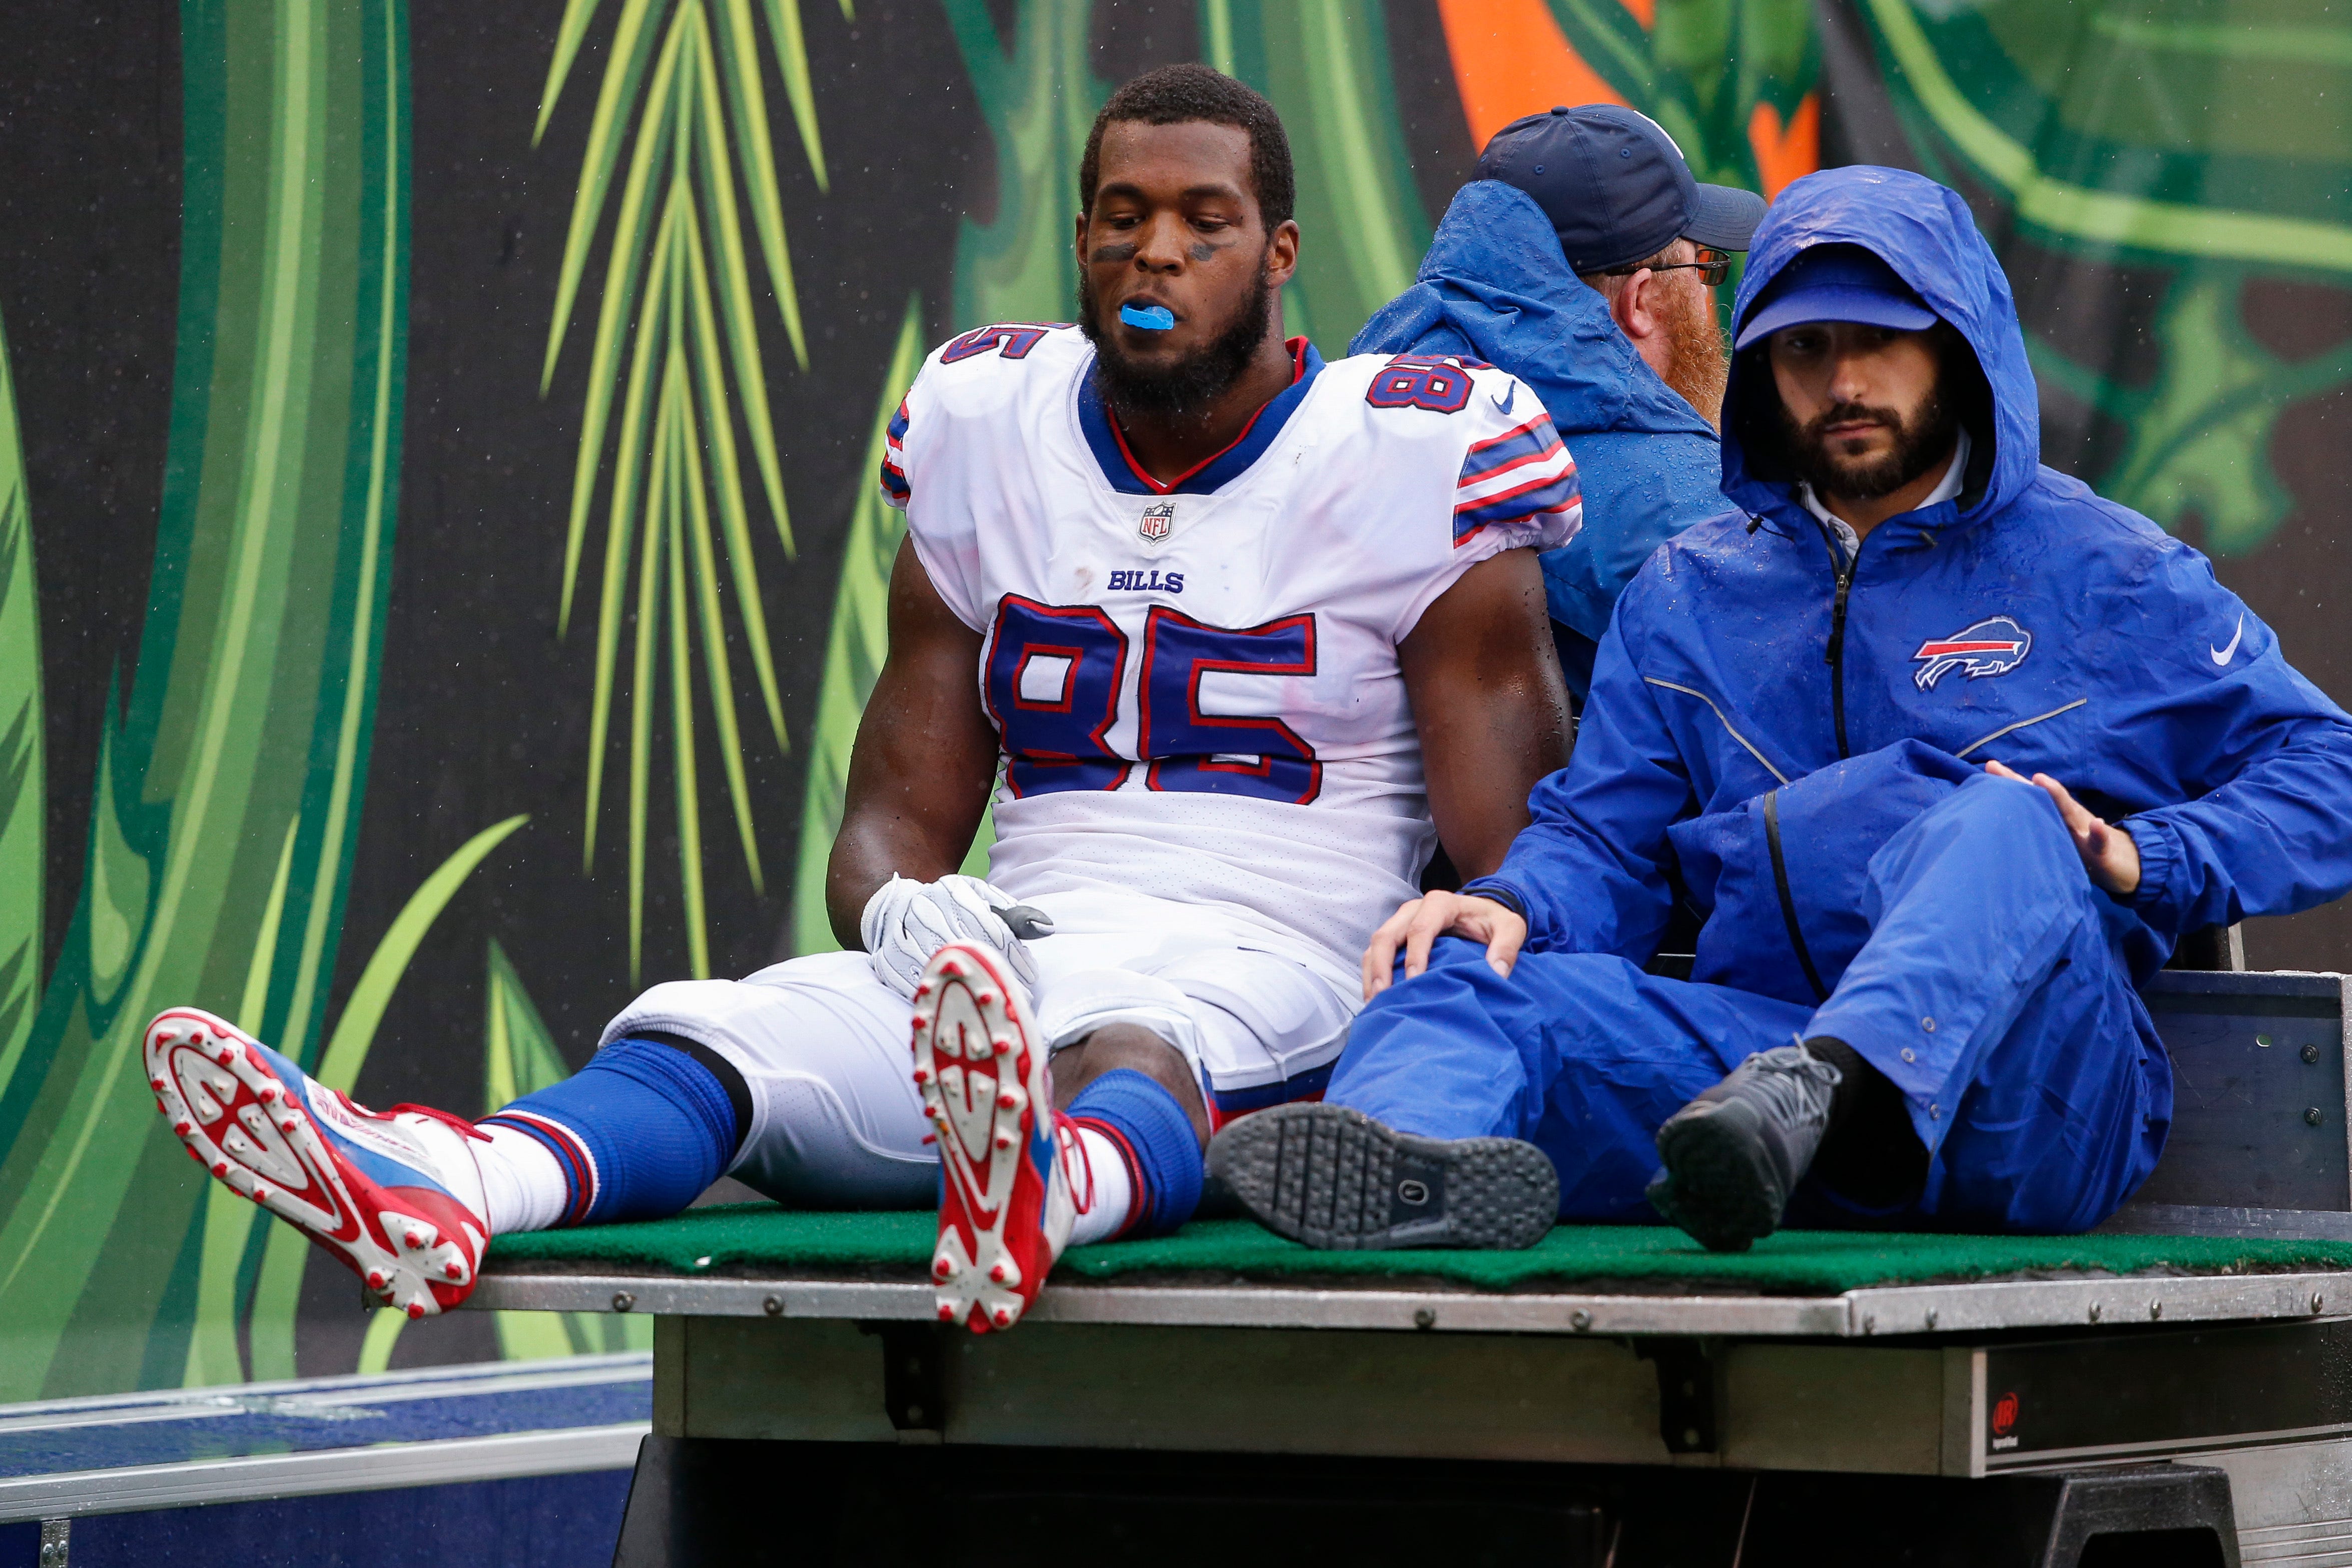 Bills tight end Clay out indefinitely with left knee injury